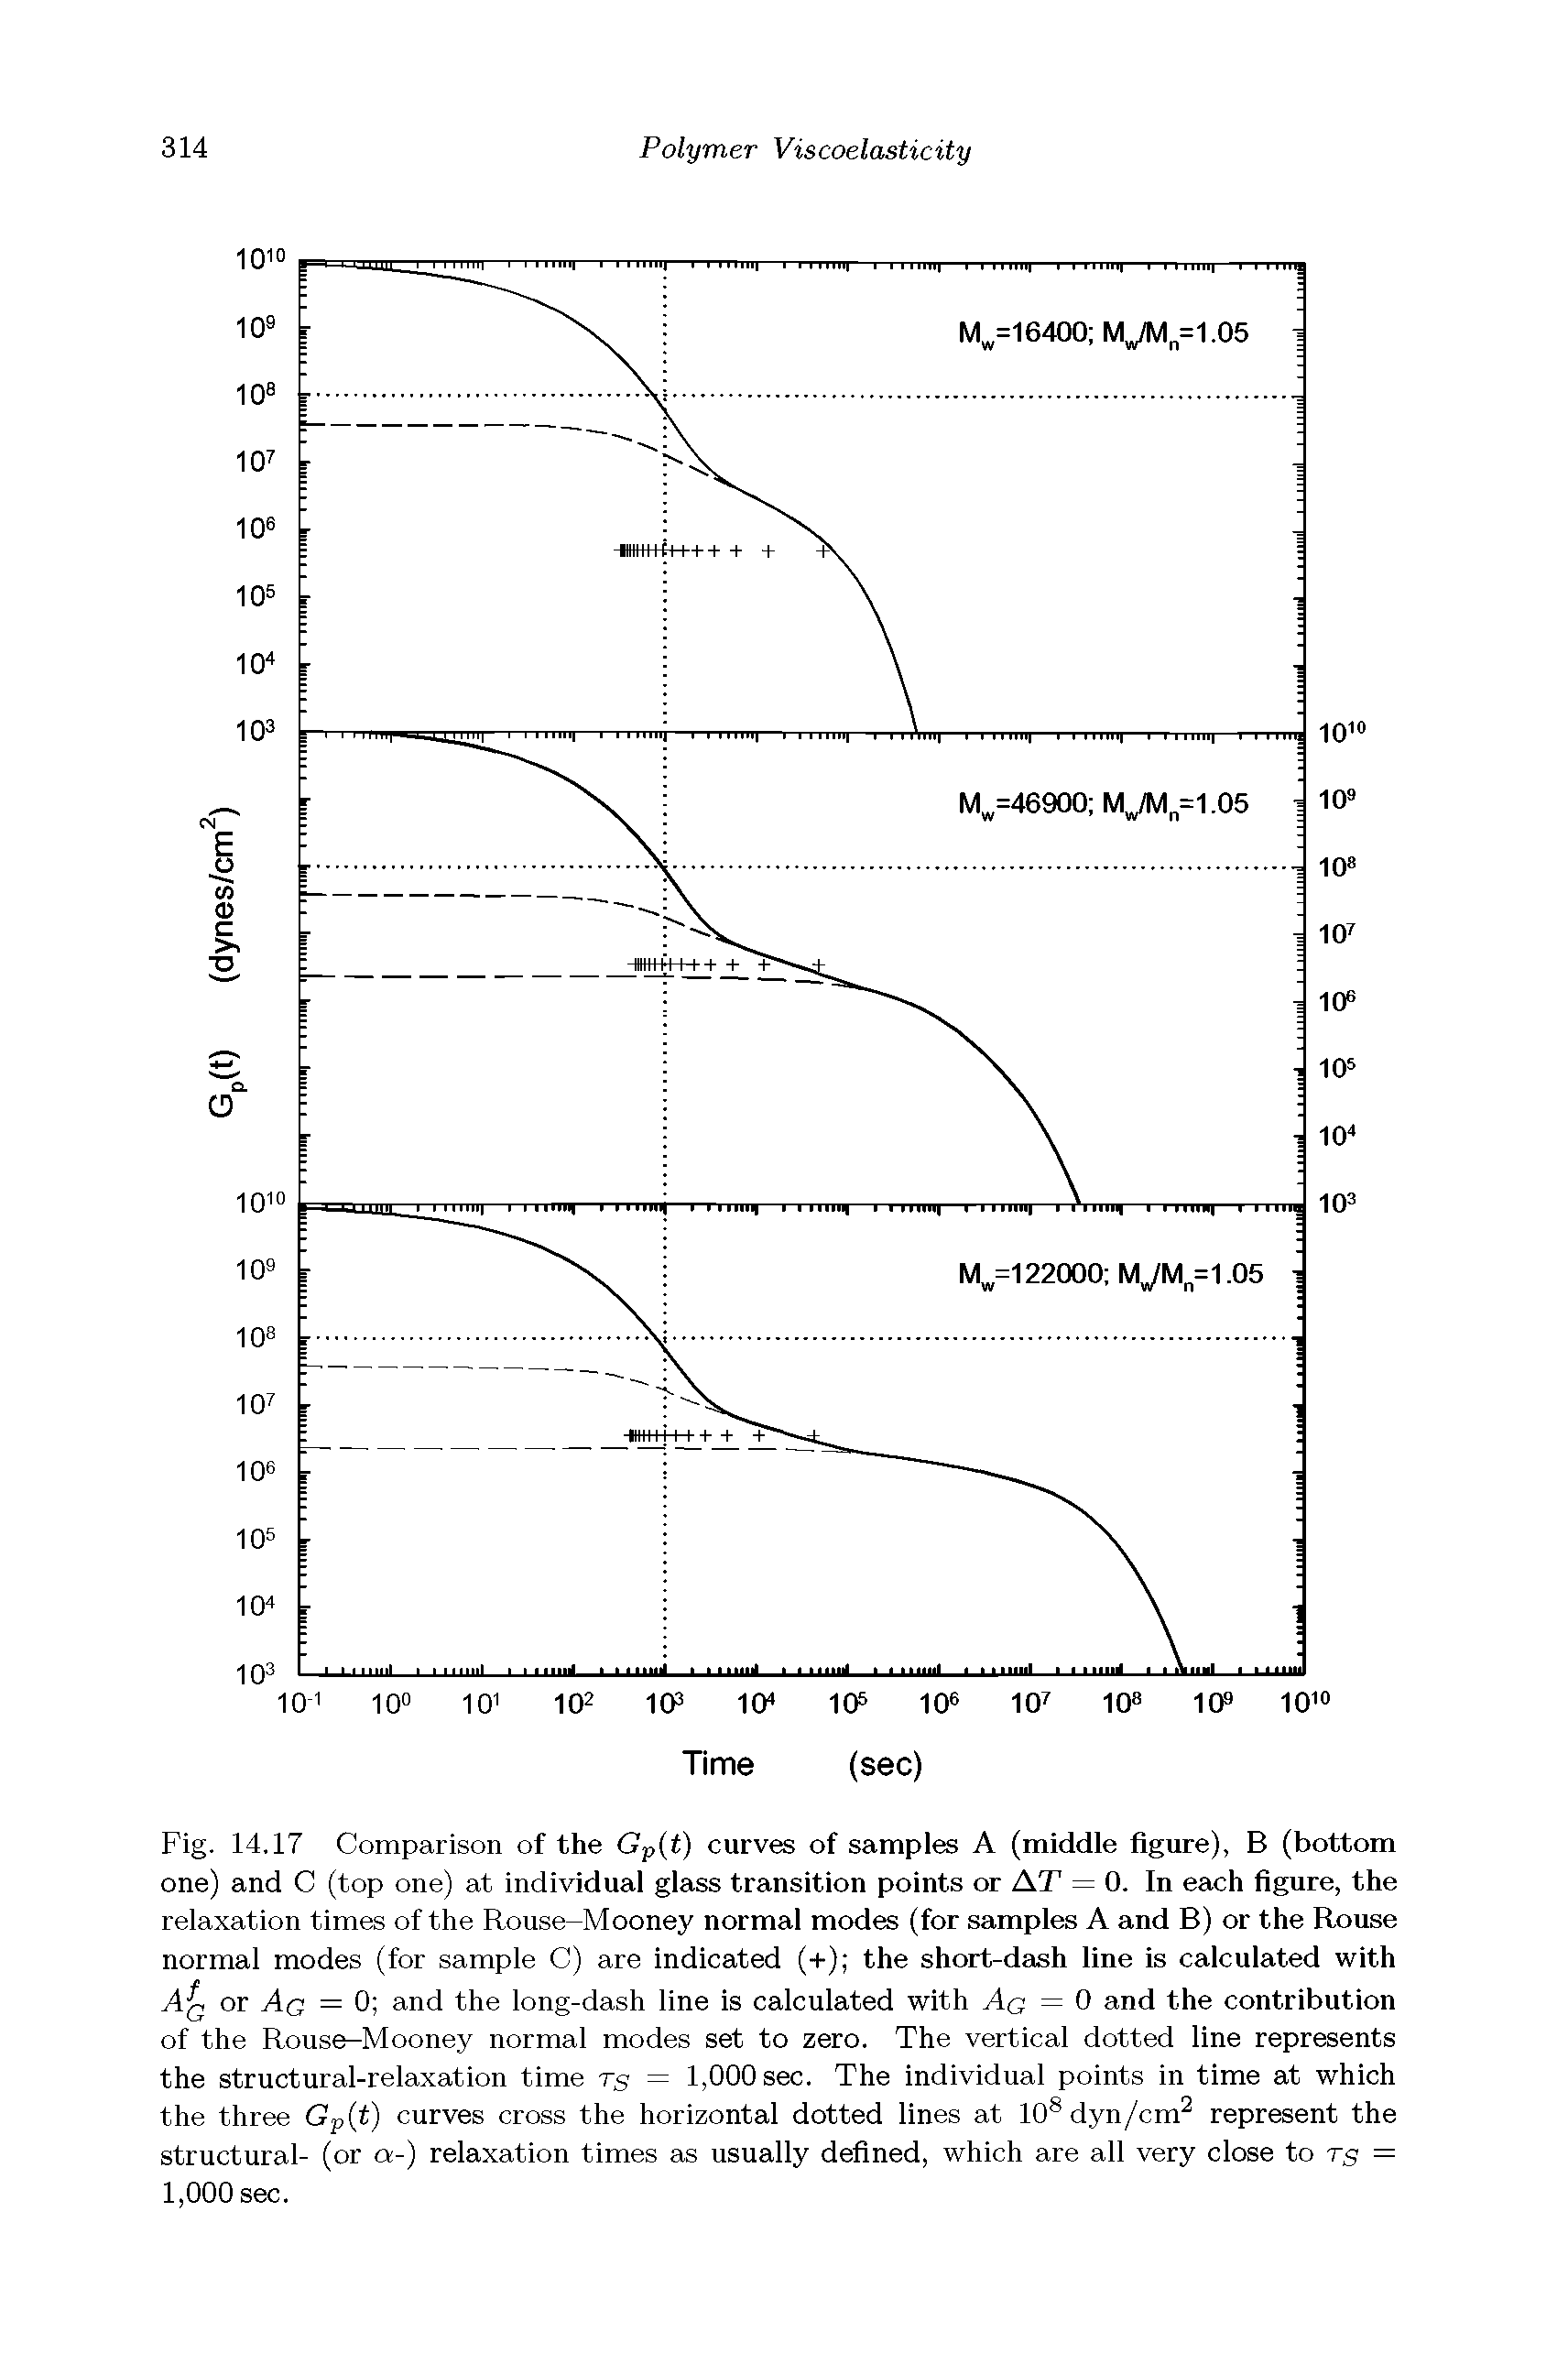 Fig. 14,17 Comparison of the Gp(t) curves of samples A (middle figure), B (bottom one) and C (top one) at individual glass transition points or AT = 0. In each figure, the relaxation times of the Rouse-Mooney normal modes (for samples A and B) or the Rouse normal modes (for sample C) are indicated (+) the short-dash line is calculated with Aq or Aa = 0 and the long-dash line is calculated with Aq = 0 and the contribution of the Rouse-Mooney normal modes set to zero. The vertical dotted line represents the structural-relaxation time ts = 1,000 sec. The individual points in time at which the three Gp t) curves cross the horizontal dotted lines at 10 dyn/cm represent the structural- (or a-) relaxation times as usually defined, which are all very close to ts = 1,000 sec.